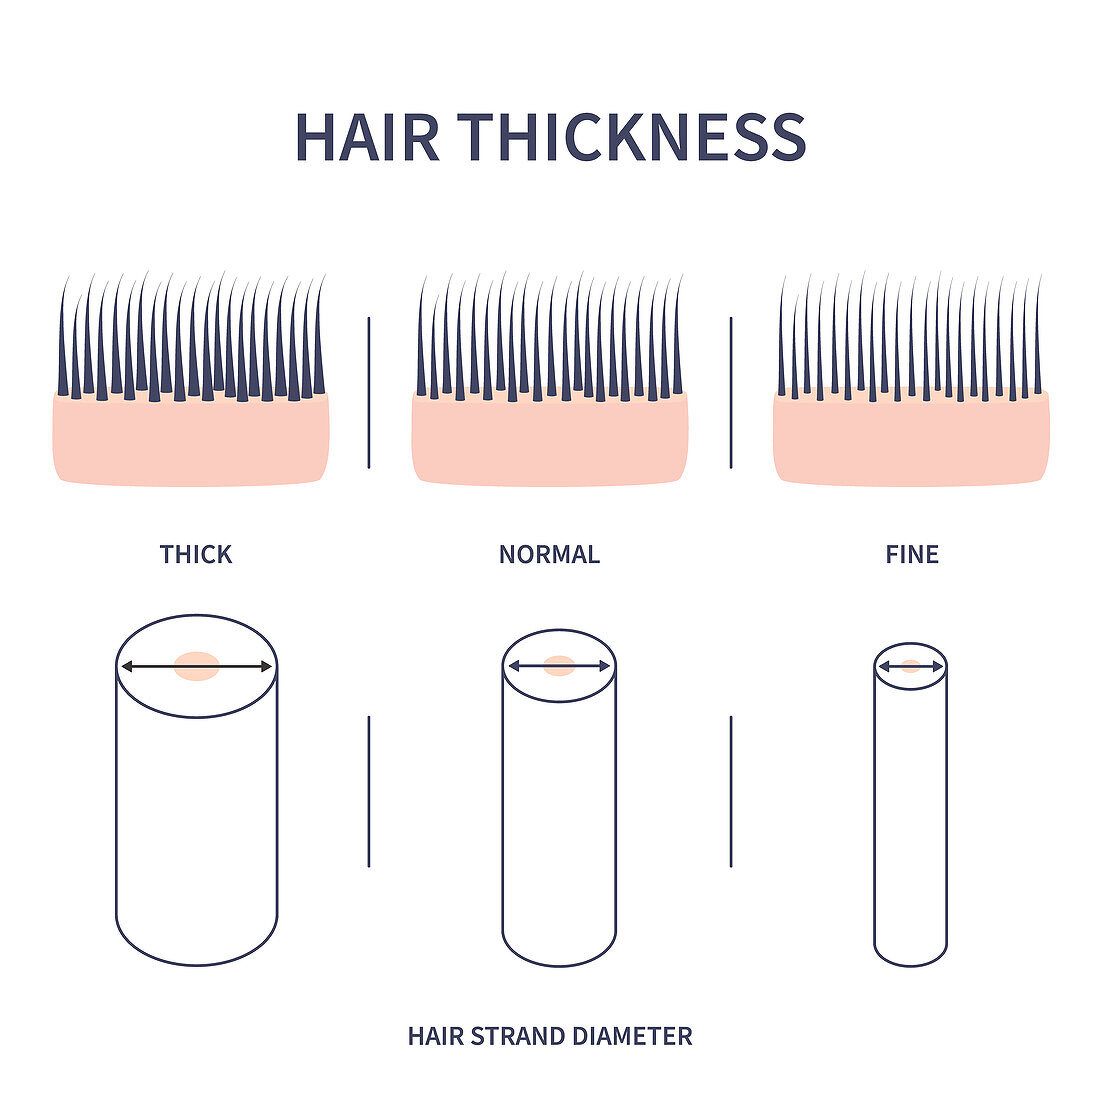 Hair thickness types, conceptual illustration